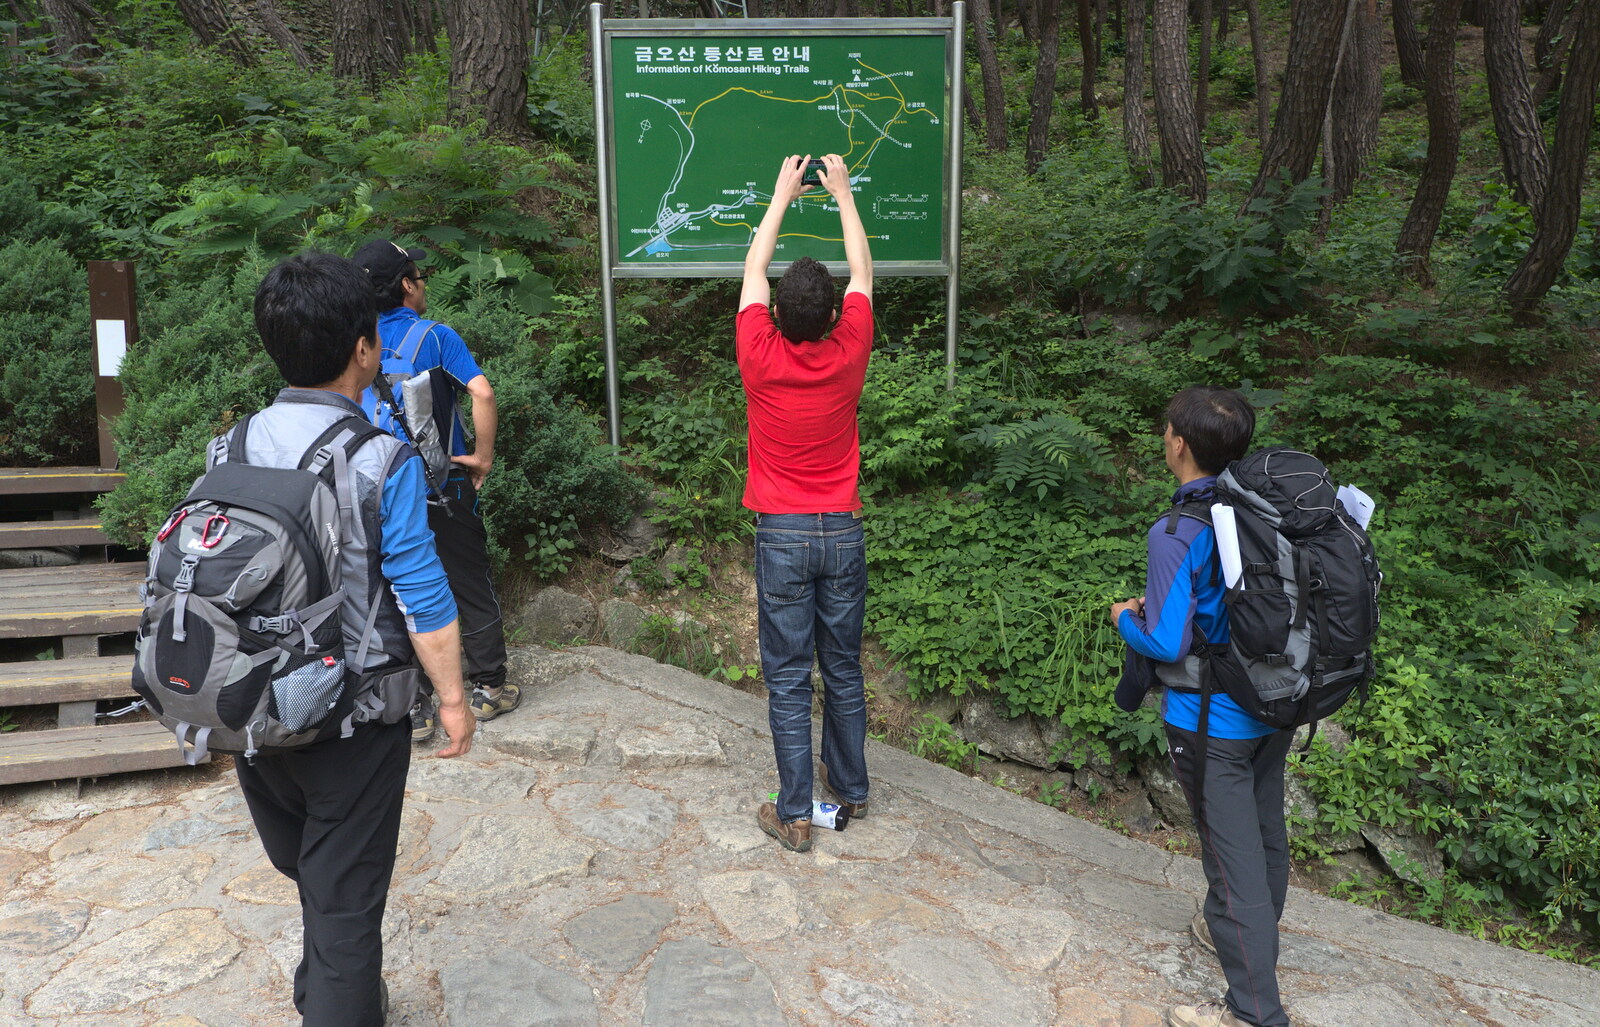 Chris photographs our route before we set off from Working at Samsung, and Geumosan Mountain, Gumi, Gyeongsangbuk-do, Korea - 24th June 2012